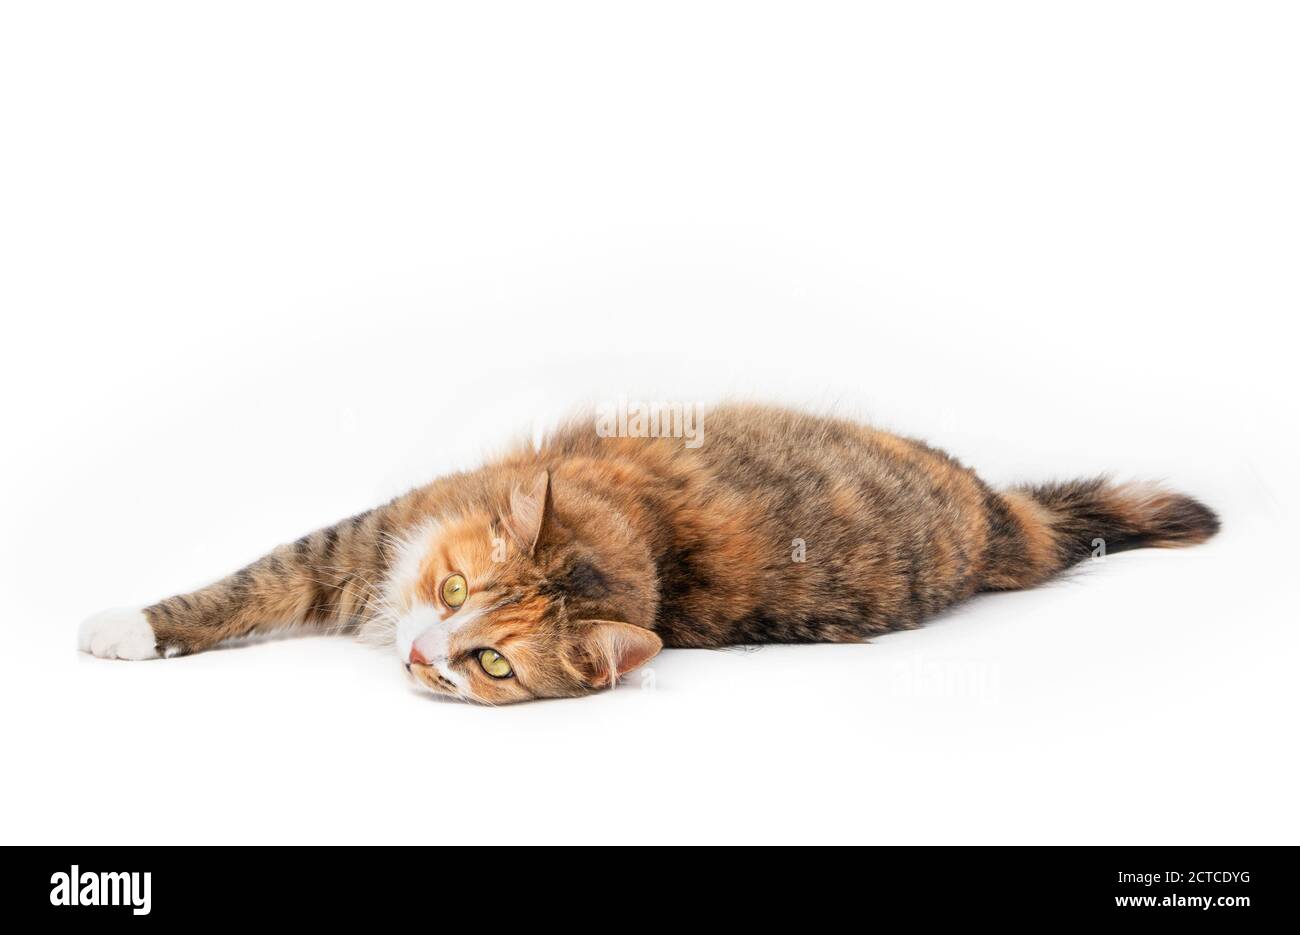 Multicolored long hair cat stretched out. Full body of relaxed kitty, lying sideways with belly-up. Striking orange and white face markings. Stock Photo